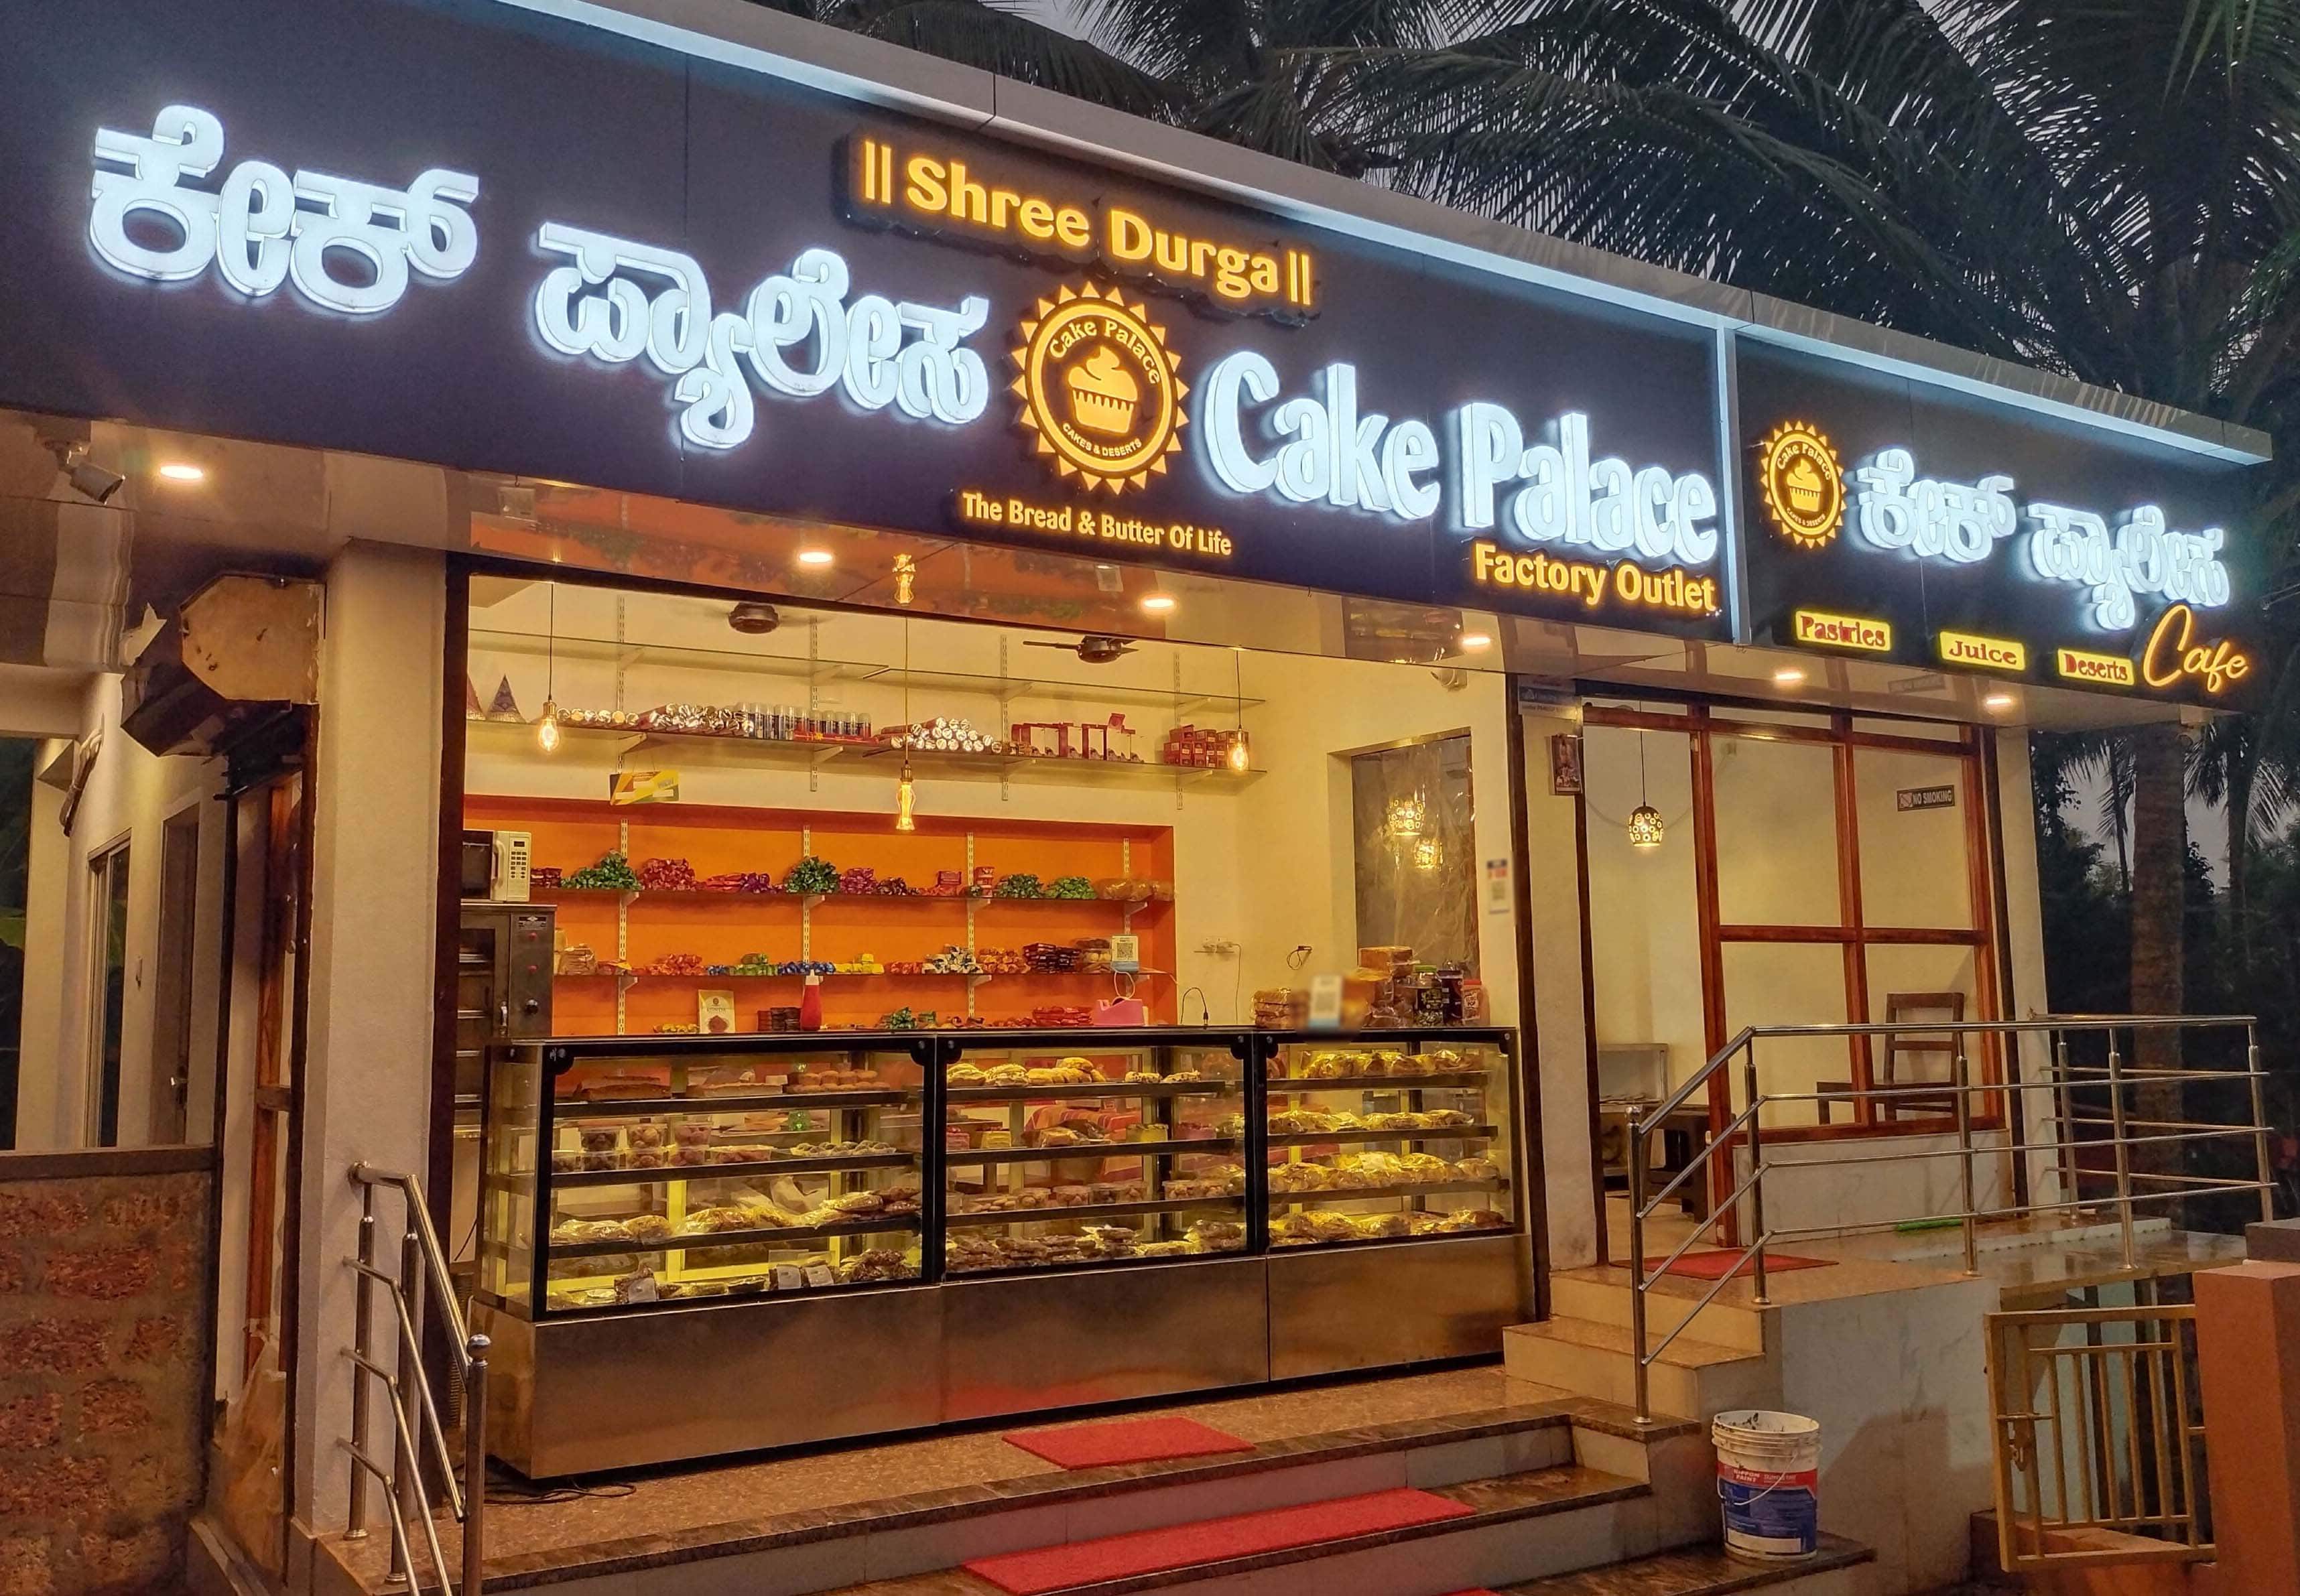 Cake Palace in Sit Campus,Tumkur - Best Cake Shops in Tumkur - Justdial